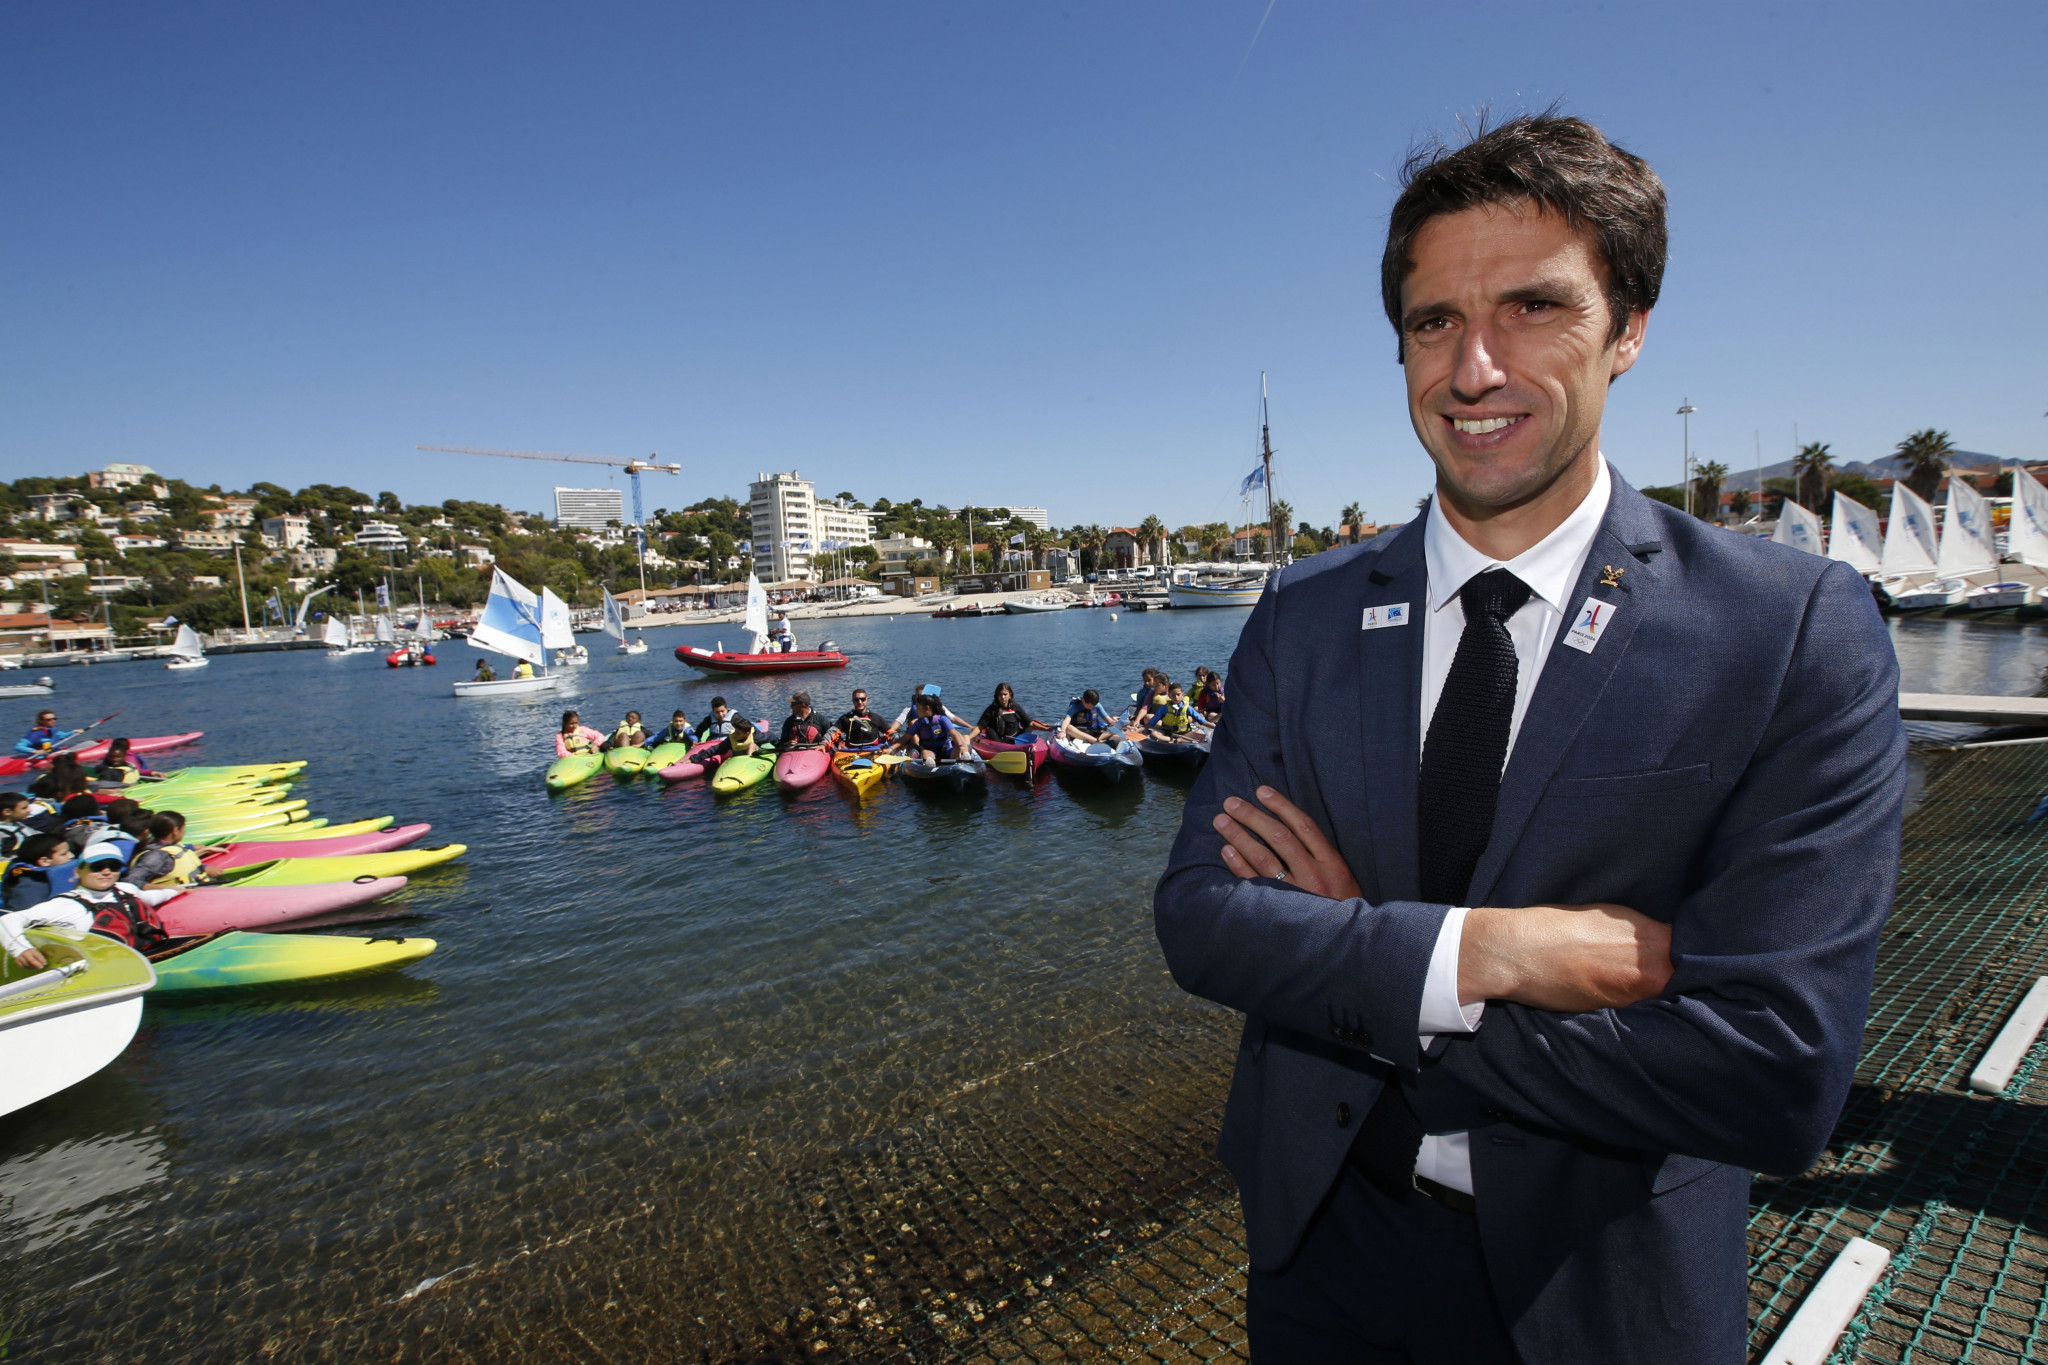 Estanguet offers thanks to those who contributed to successful Paris 2024 bid